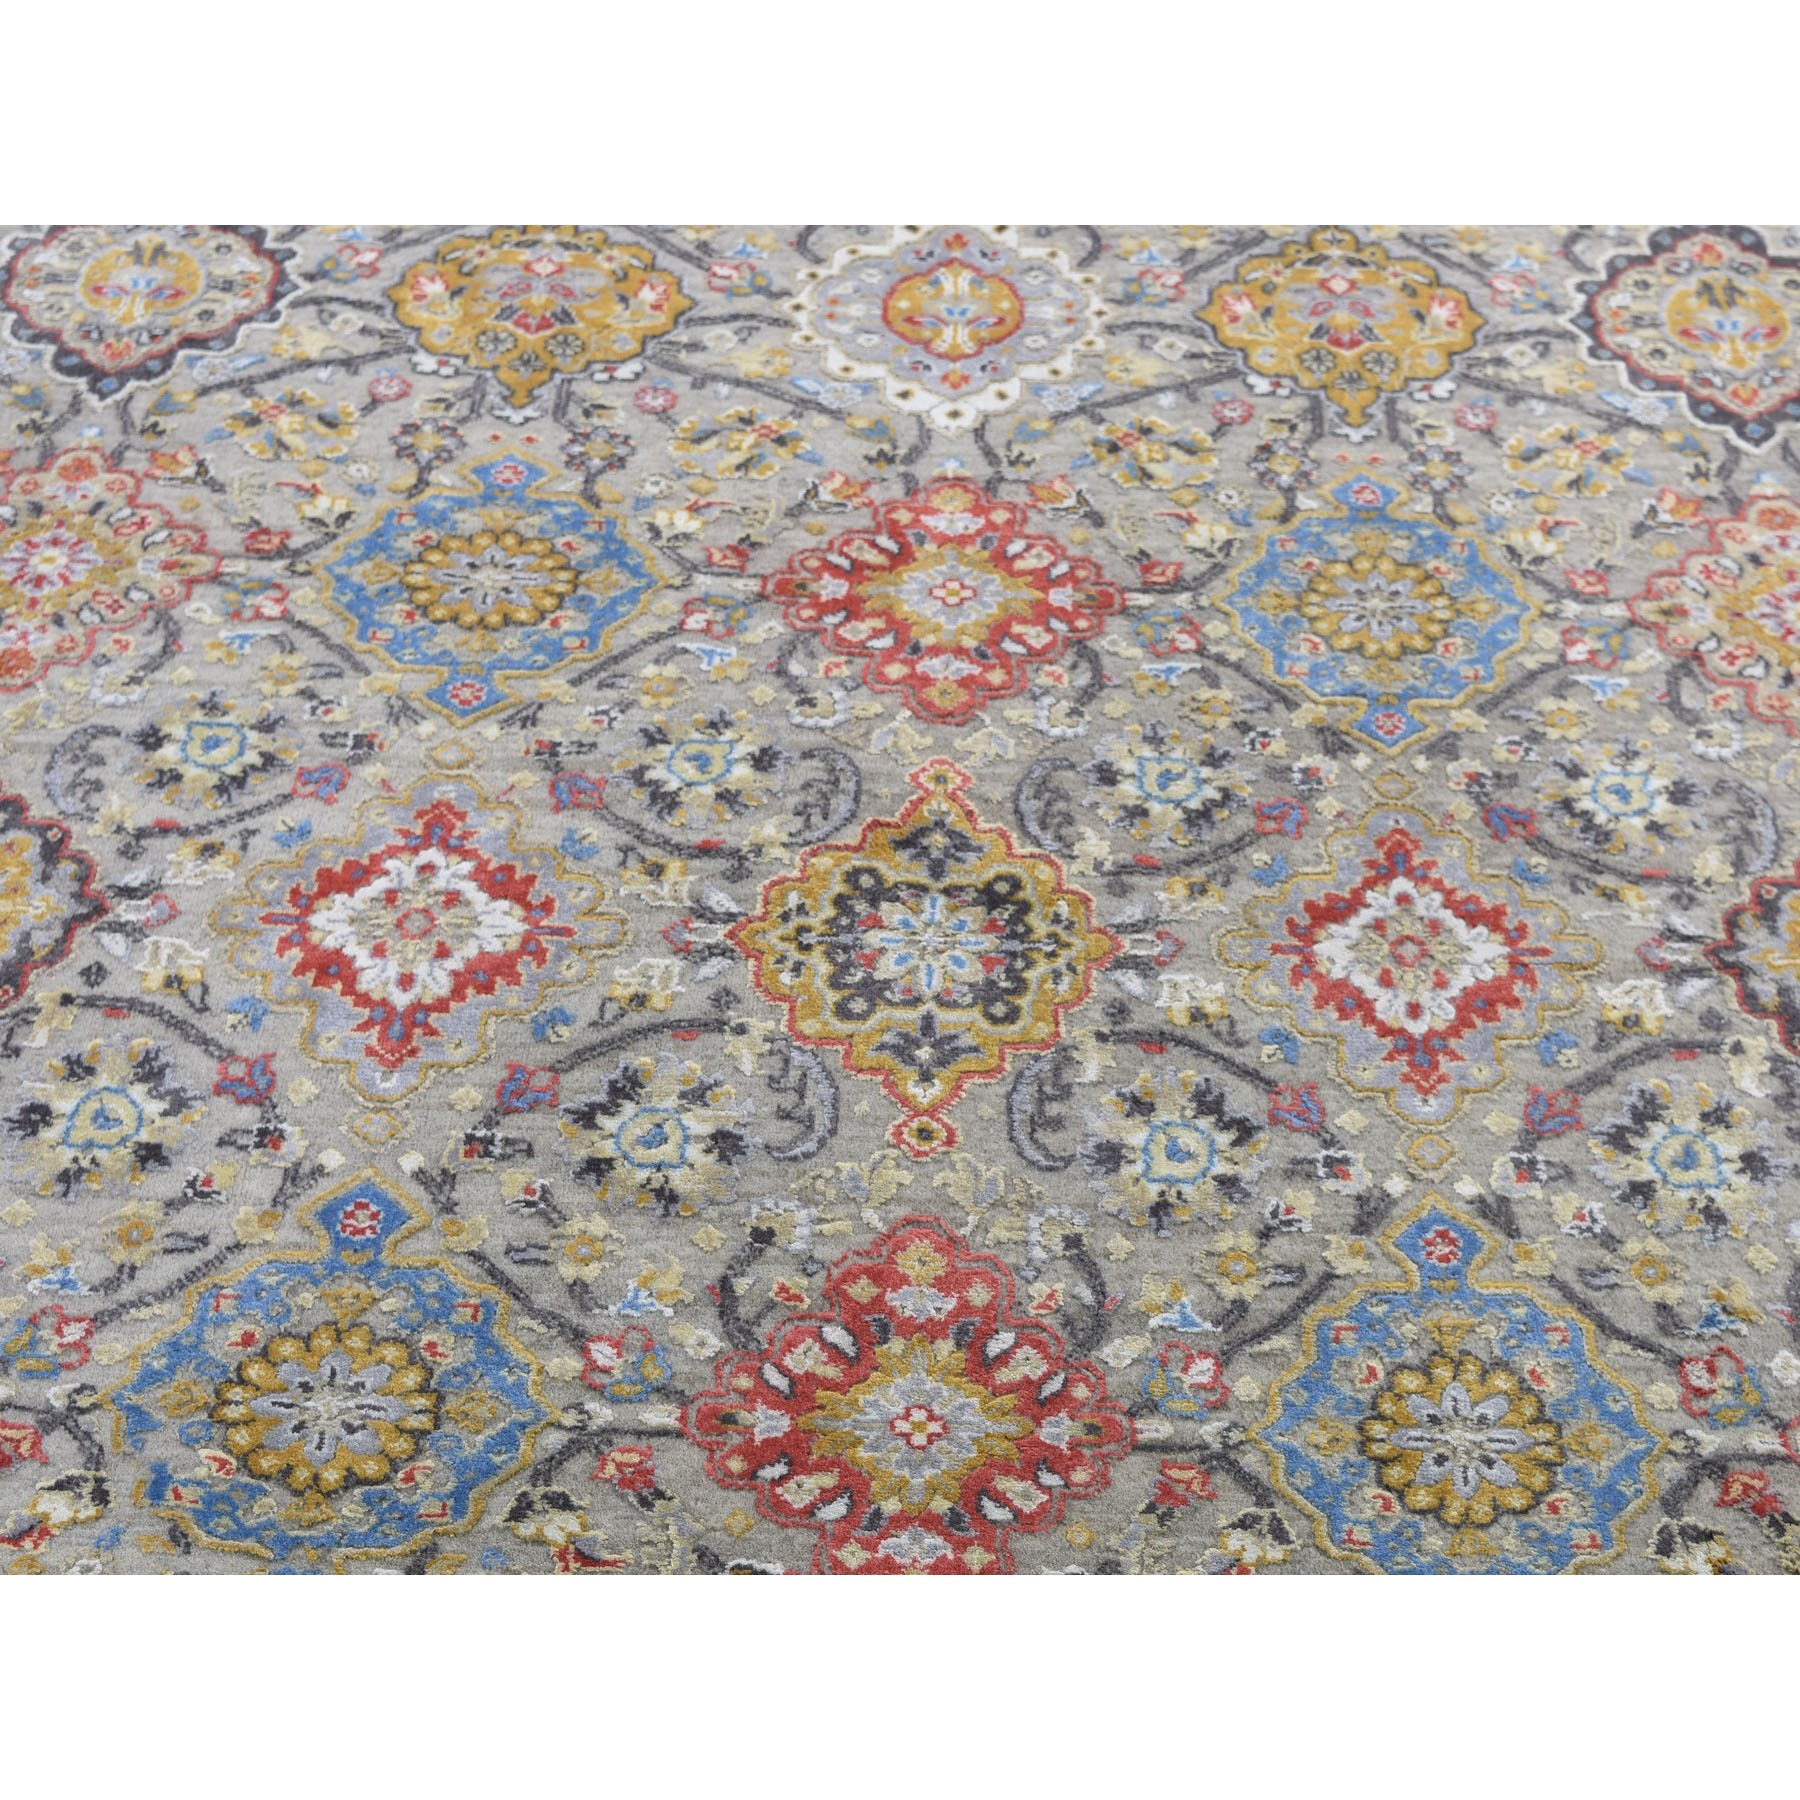 12-x18-1  Oversize THE SUNSET ROSETTES Wool & Pure Silk Hand-Knotted Oriental Rug 